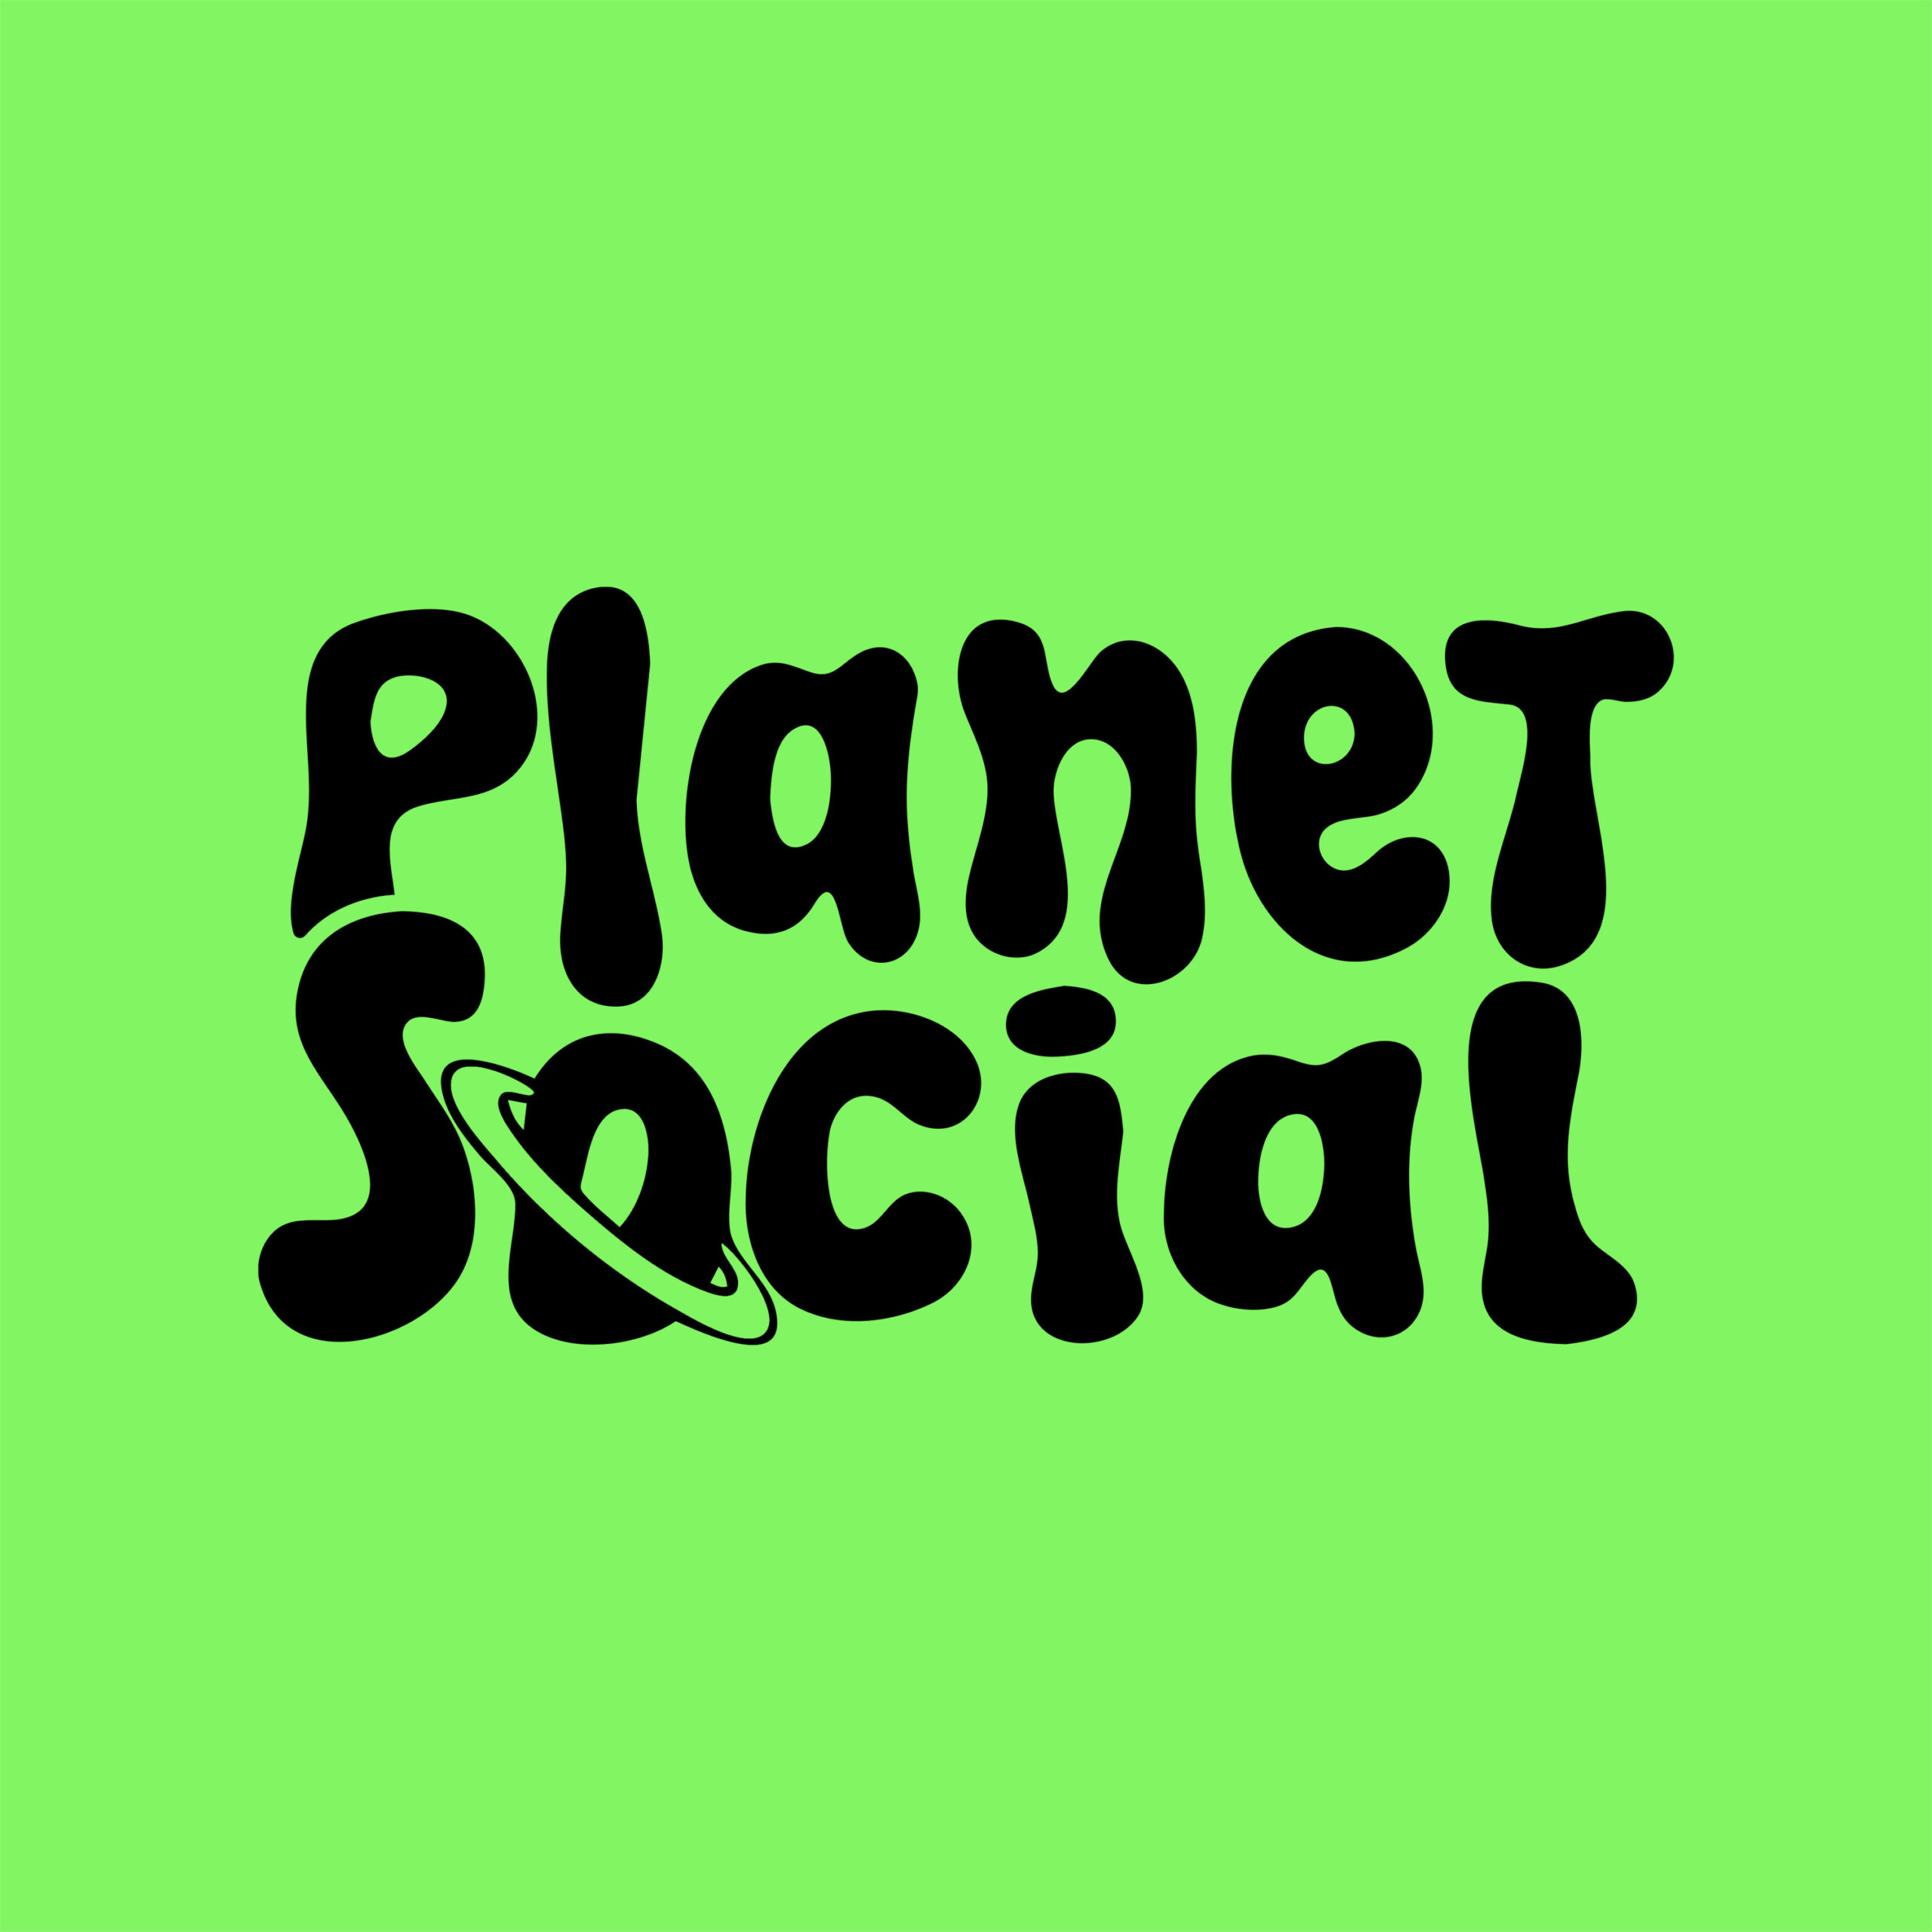 Planet social logo on a green background.